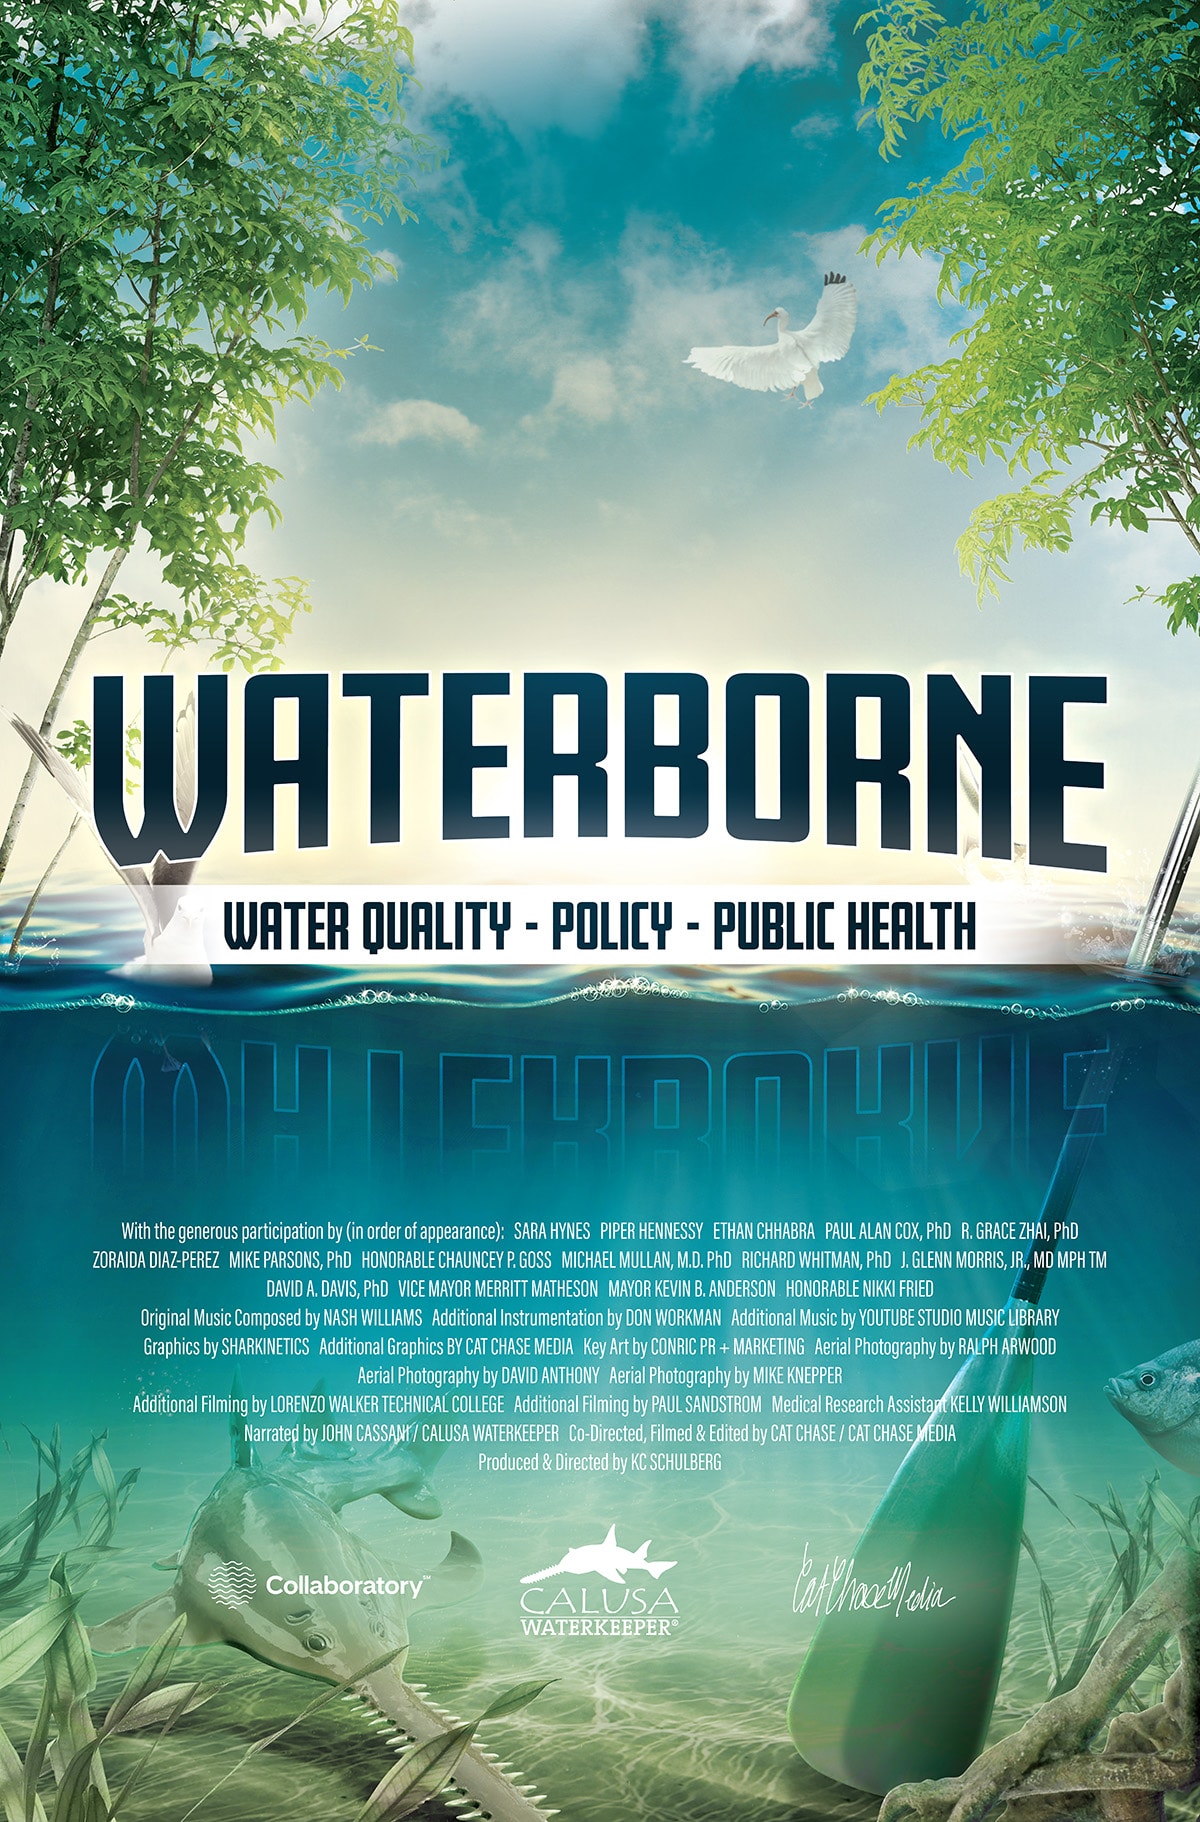 CalusaWaterkeeper_Waterborne_MarqueePoster_26x40_20210804_HRB_Final-med